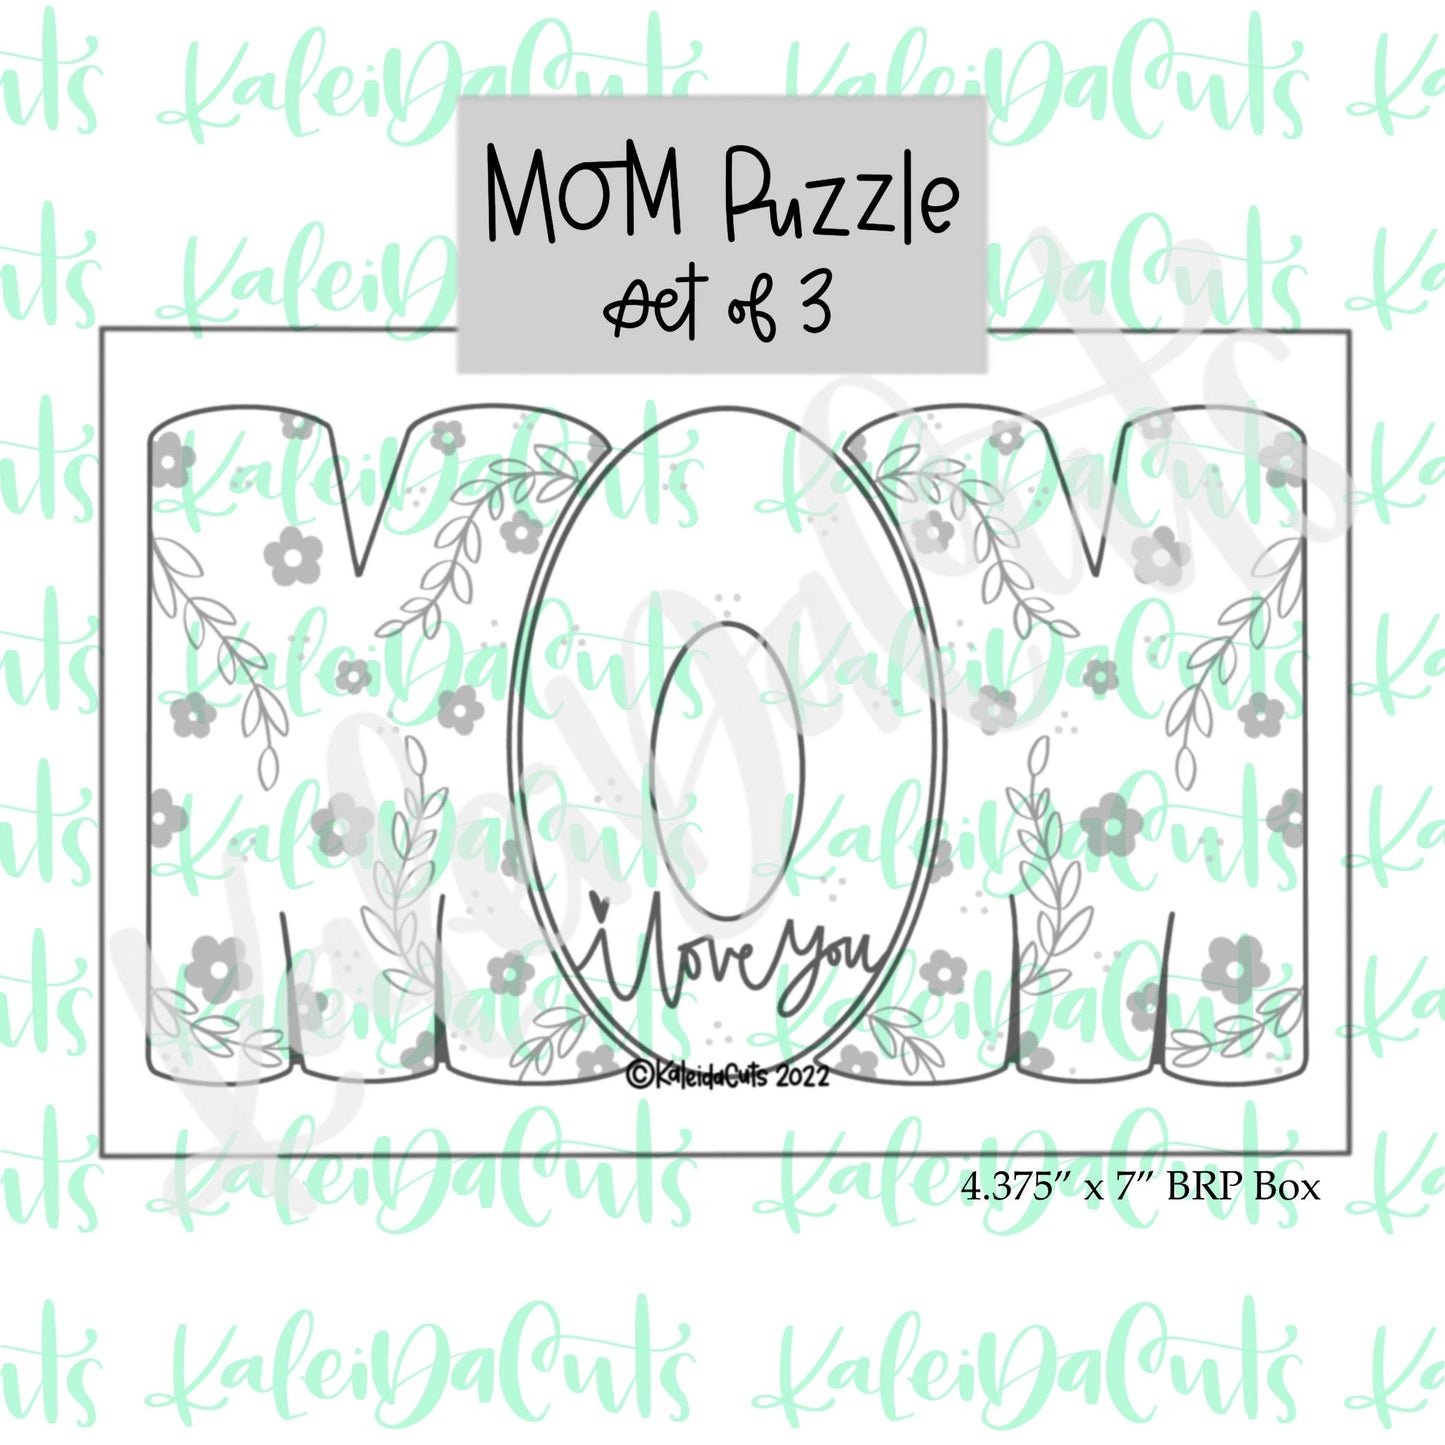 Mom Puzzle Cookie Cutter Set of 3